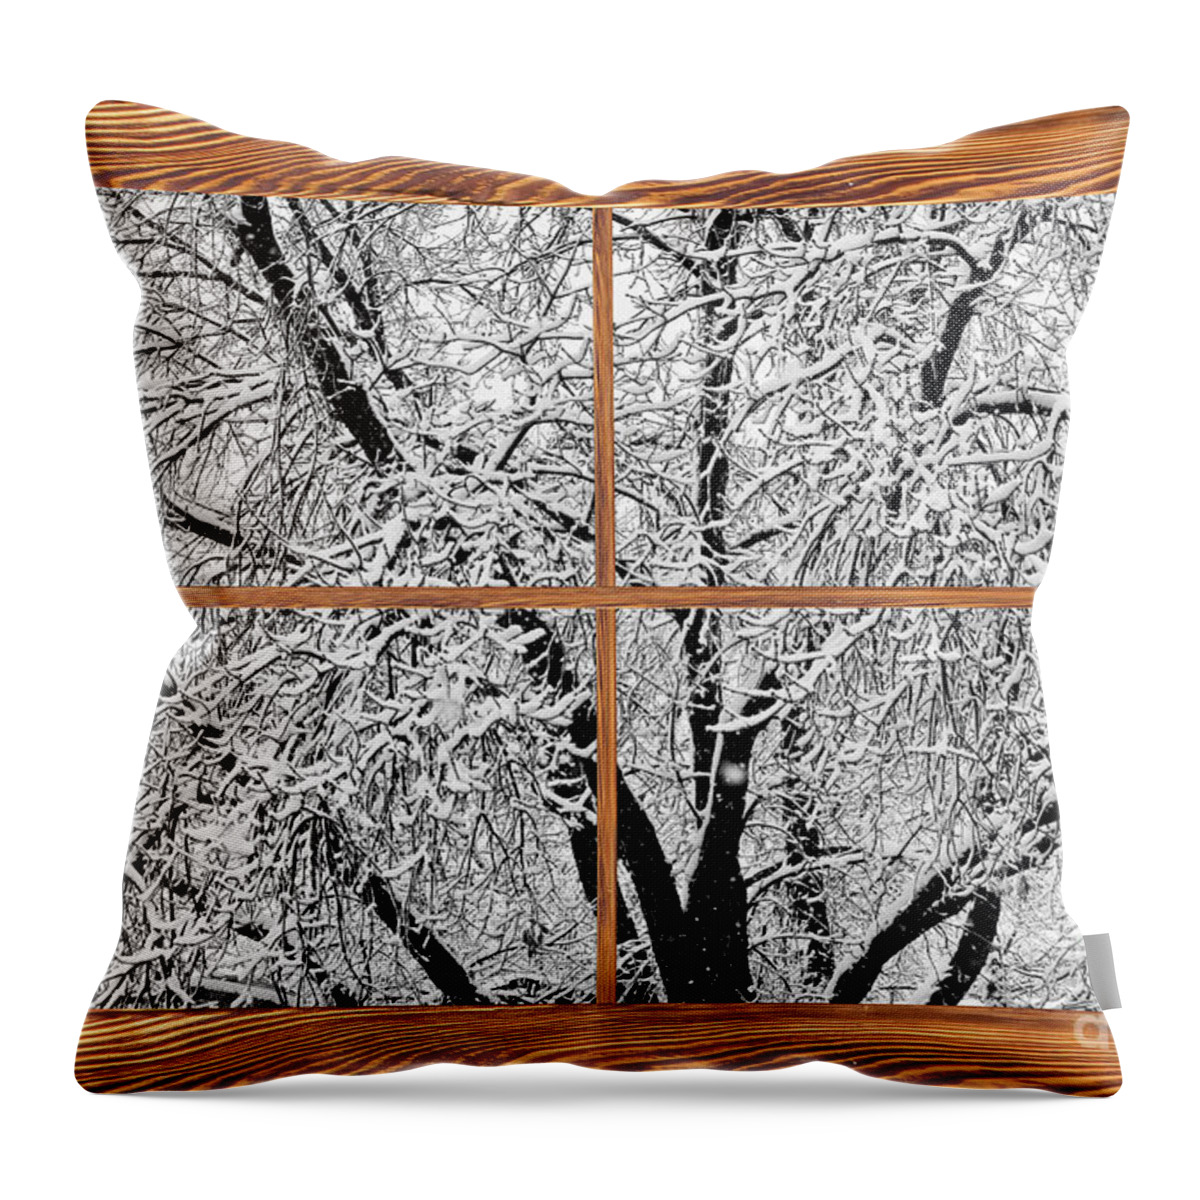 Windows Throw Pillow featuring the photograph Snowy Tree Branches Barn Wood Picture Window Frame View by James BO Insogna